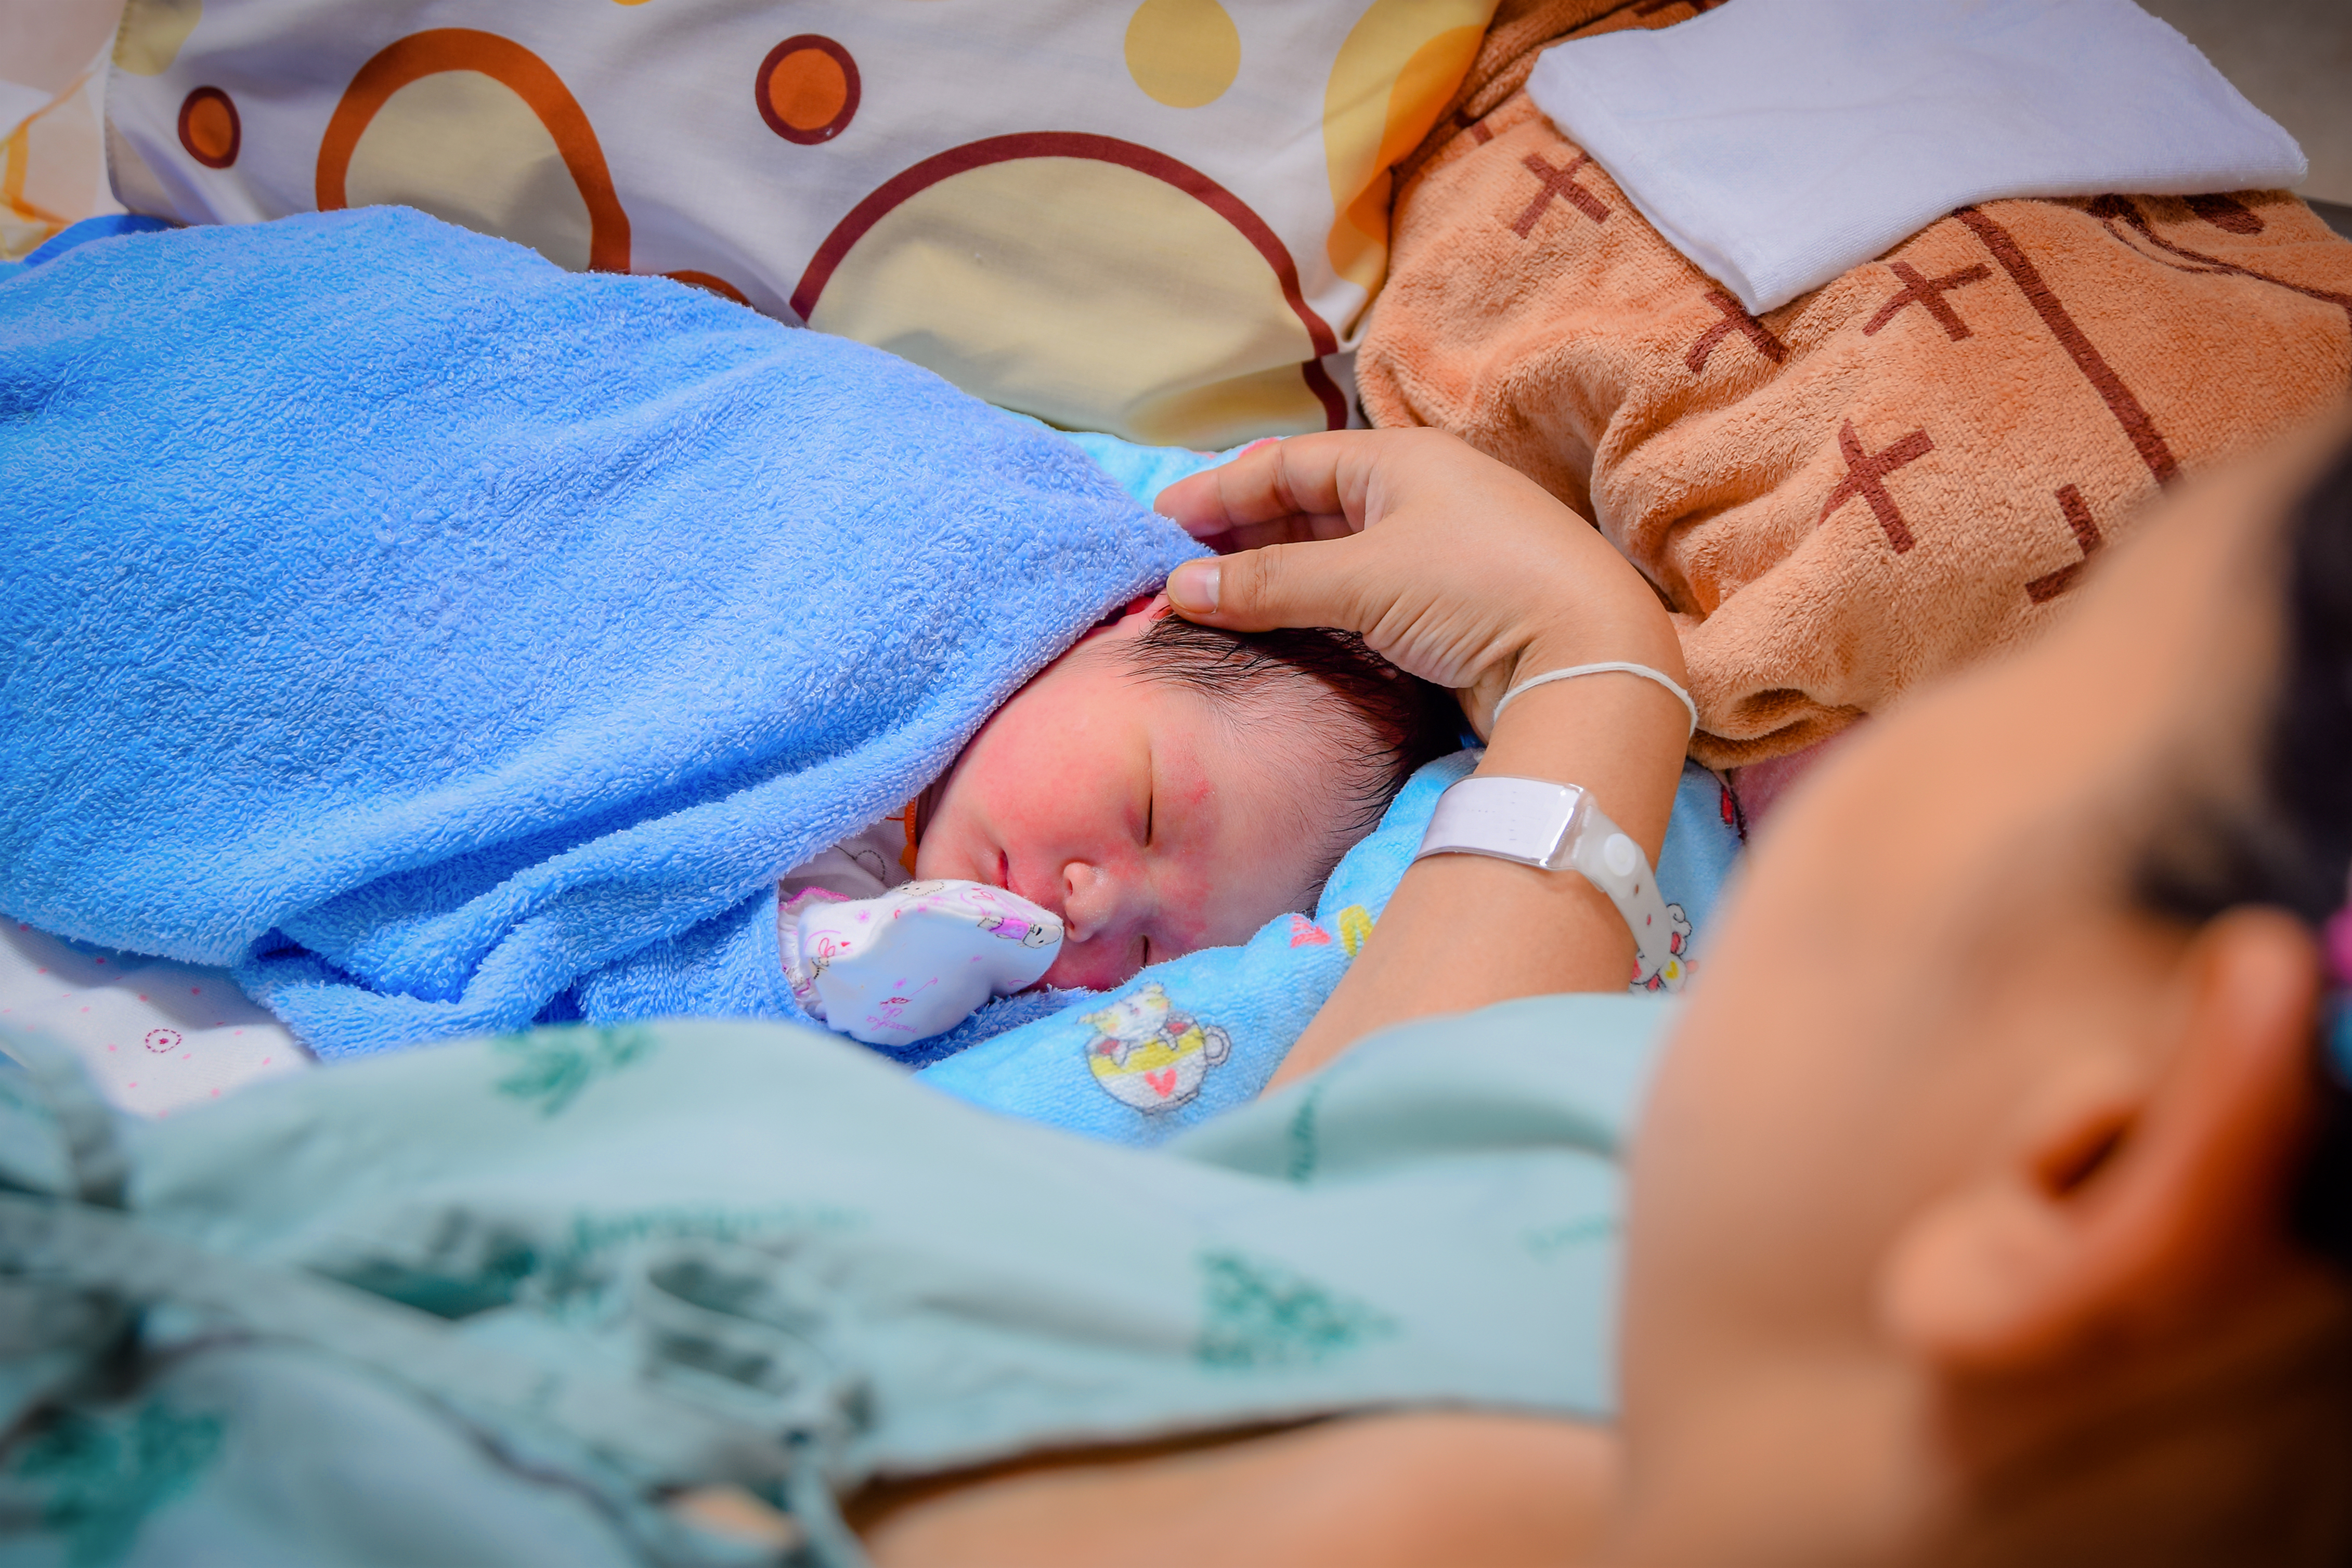 Newborn and Mother in hospital after giving birth | Source: Shutterstock.com